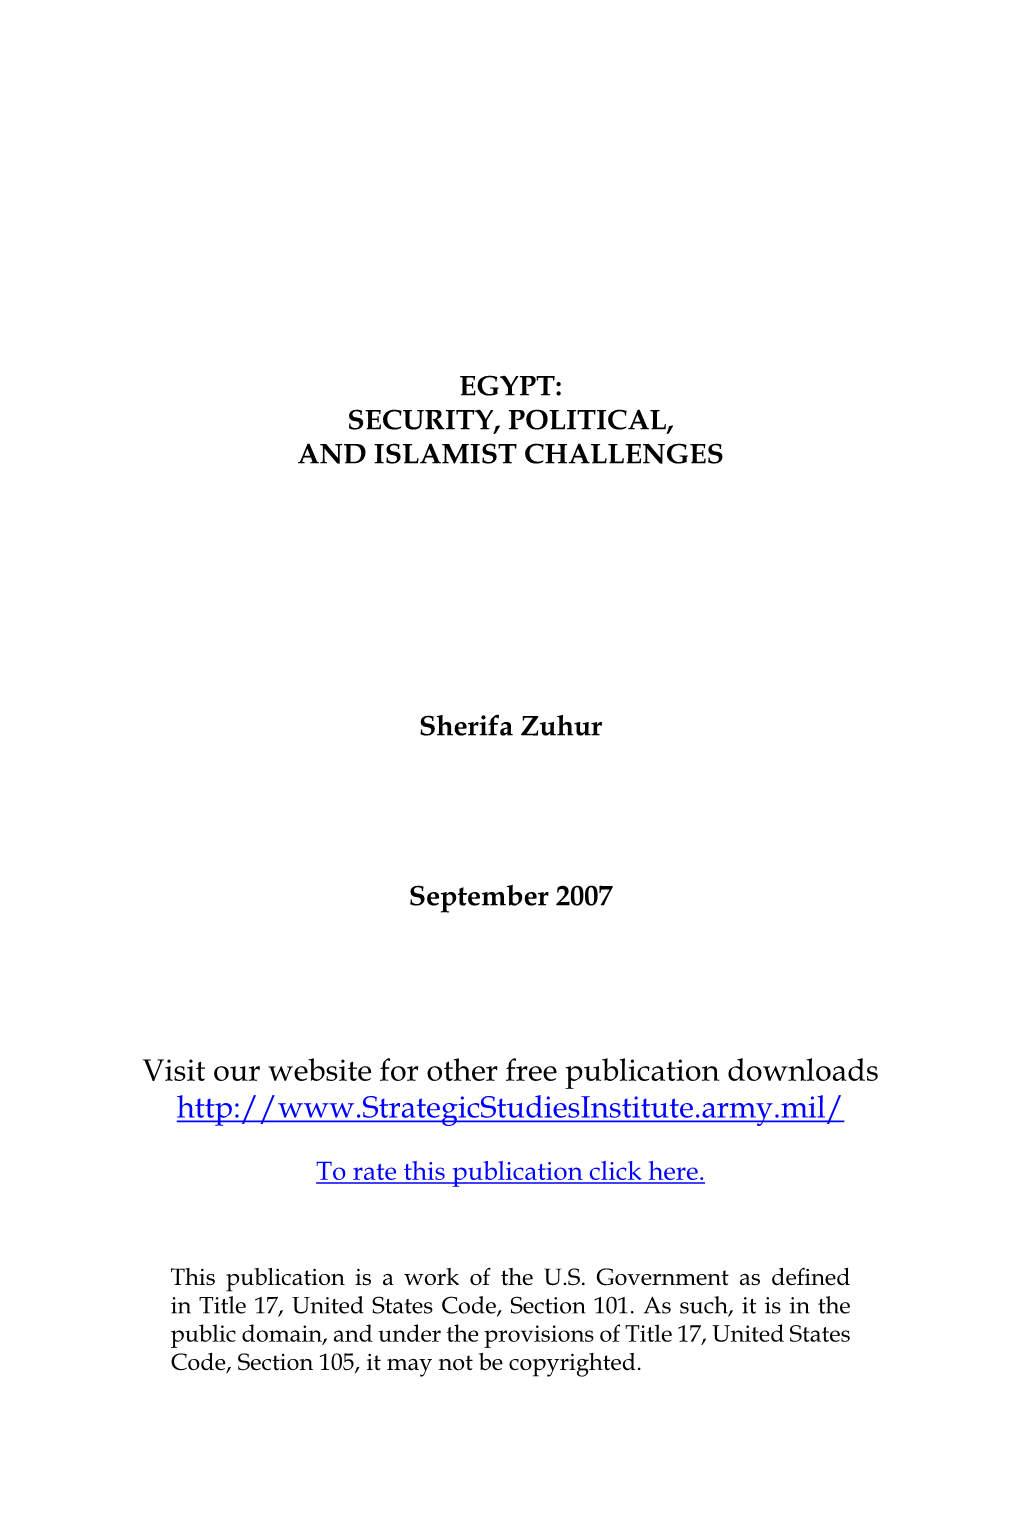 Egypt: Security, Political, and Islamist Challenges